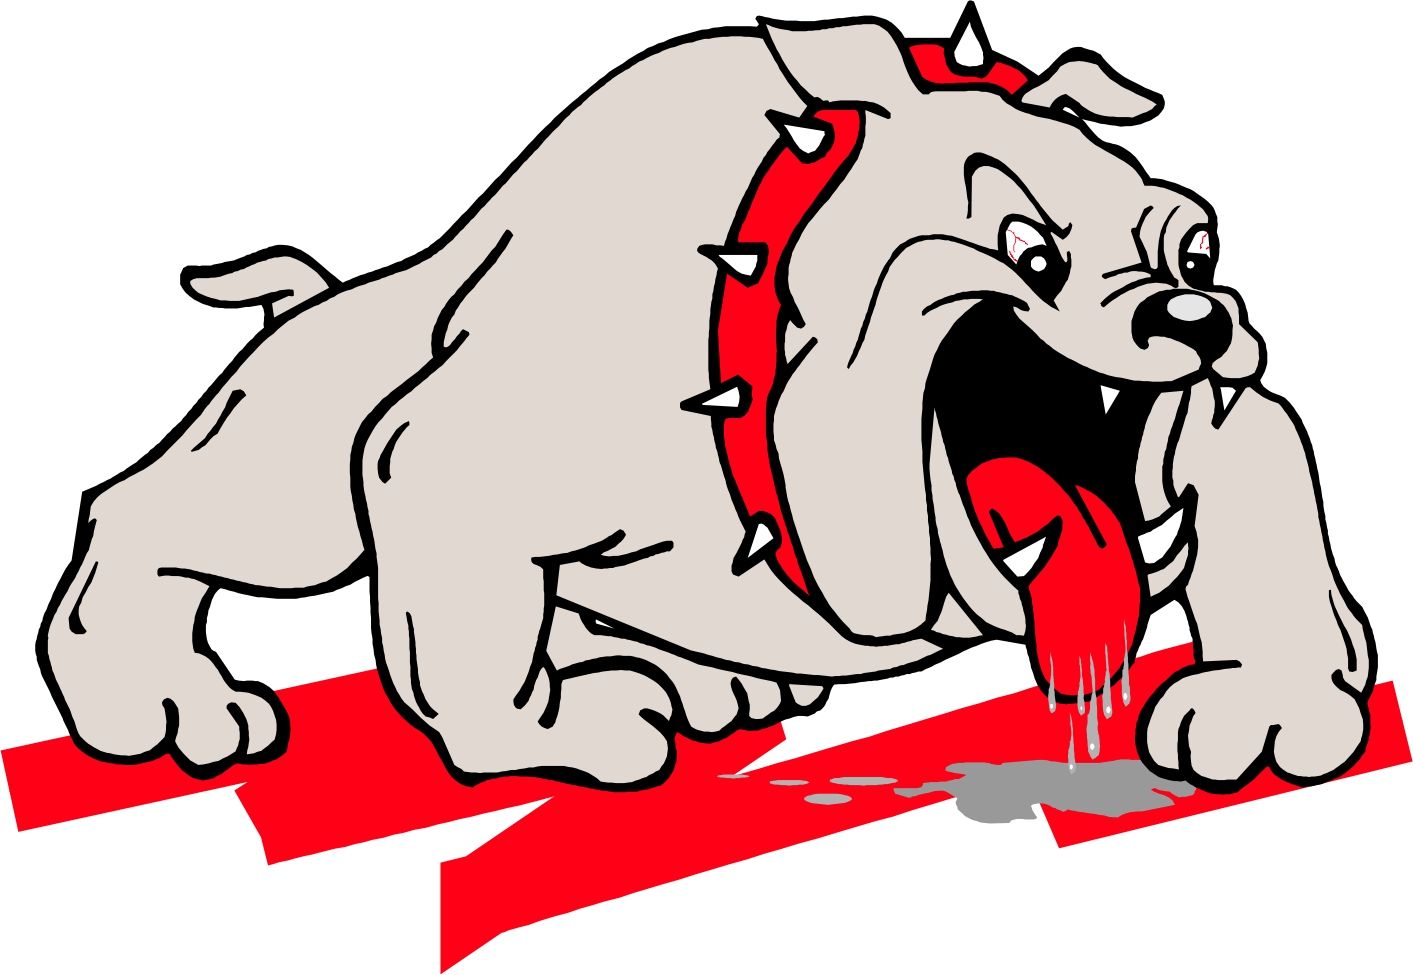 Free Cartoon Picture Of Bulldogs, Download Free Clip Art, Free Clip Art on Clipart Library